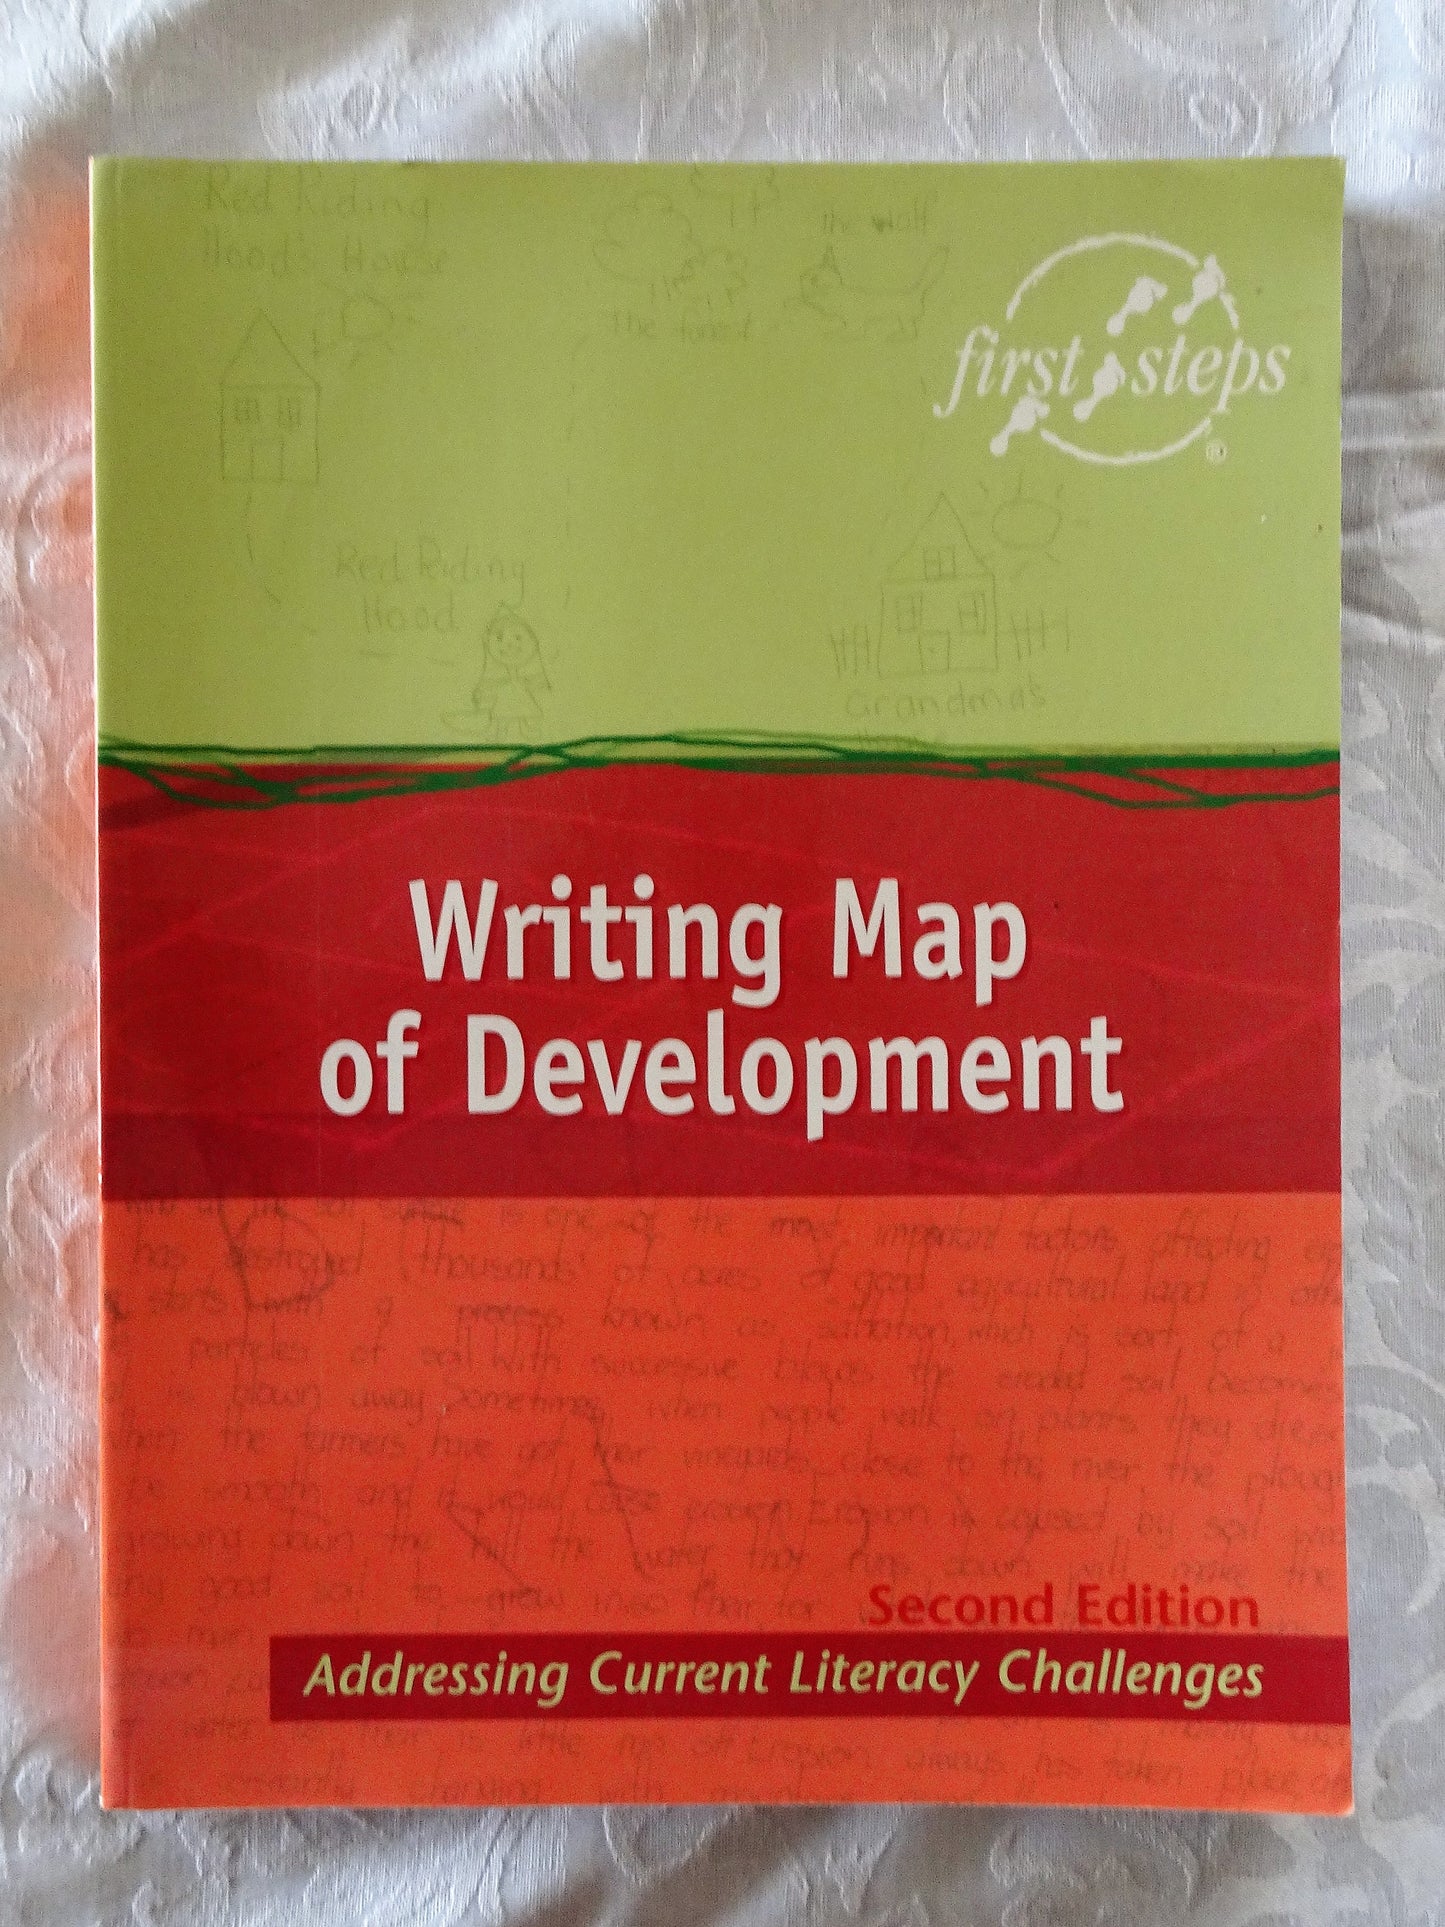 First Steps Writing Map of Development